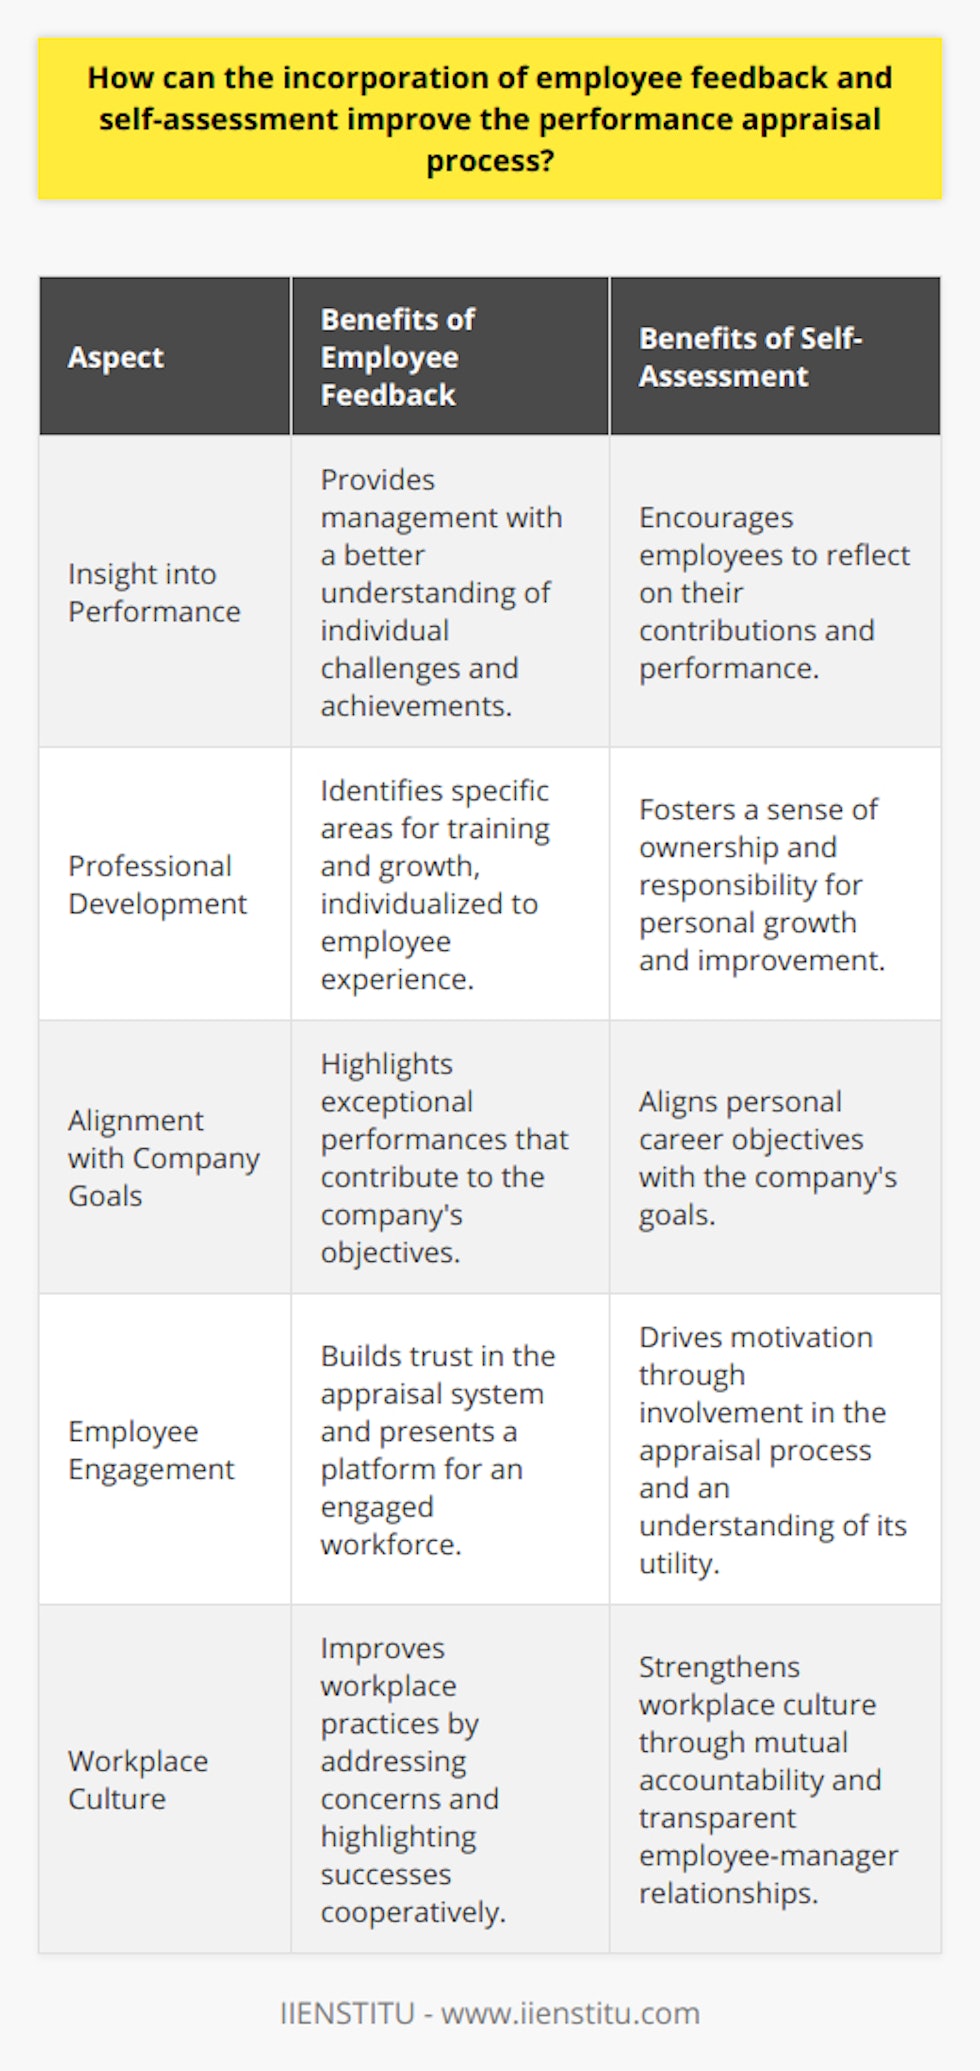 The inclusion of employee feedback and self-assessment within the performance appraisal process represents a significant move towards a more holistic and employee-centric approach to performance evaluation.When employees are given a voice through feedback mechanisms, it can lead to a richer understanding of individual experiences and the challenges faced in their roles. This insight allows for more tailored, meaningful appraisals and can highlight hidden areas of talent or concern that may be overlooked by management alone. As a result, incorporating employee feedback can lead to the identification of specific training needs, the recognition of exceptional performance, and the improvement of workplace practices.Self-assessment serves as a powerful tool in this refined appraisal process because it encourages individual reflection. When employees assess their own work, they become actively involved in their professional development. This reflection can reinforce their understanding of their contributions to the company and encourage personal growth and proactivity in seeking out opportunities for improvement. Furthermore, when the self-assessment is compared with managerial assessments, discrepancies can be addressed, leading to more comprehensive development plans and a greater understanding between employees and management.To harness these benefits, continuous improvement must be at the heart of the appraisal system. Structuring the process so that it isn't a once-a-year event, but rather an ongoing dialogue, keeps the practice relevant and responsive. Frequent check-ins and opportunities for feedback and self-assessment ensure that the appraisal process shifts from being a retrospective analysis to a forward-looking growth framework.The collaborative approach embedded in this appraisal system can align personal career goals with corporate objectives, thereby enhancing job satisfaction and performance. When employees are part of the conversation in shaping the appraisal process, it builds their trust in the system and amplifies its perceived fairness and utility. This, in turn, can lead to a more engaged workforce.In terms of mutual accountability, introducing these components into the appraisal process sets the stage for a more transparent relationship between staff and management. It encourages joint responsibility in identifying solutions to problems, celebrating successes, and developing professionally. This reciprocal accountability can build a stronger, more cohesive workplace culture.Overall, the performance appraisal process benefits significantly from the integration of employee feedback and self-assessment. These practices elevate the process beyond mere evaluation, transforming it into a collaborative, developmental journey that speaks directly to the needs and aspirations of employees, and in doing so, advances the goals of the organization as a whole.